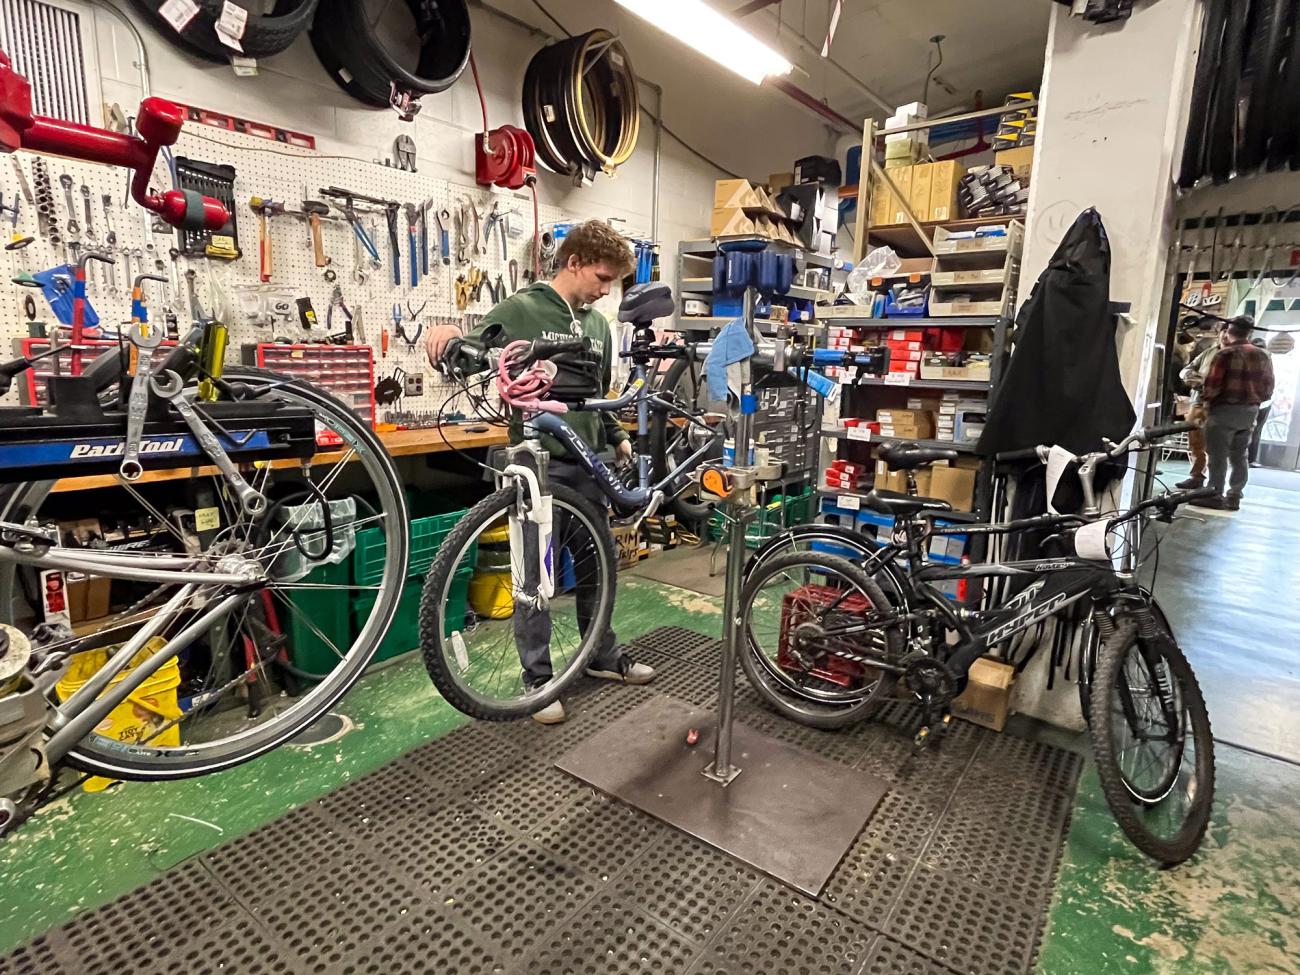 Large workshop with bicycles being repaired